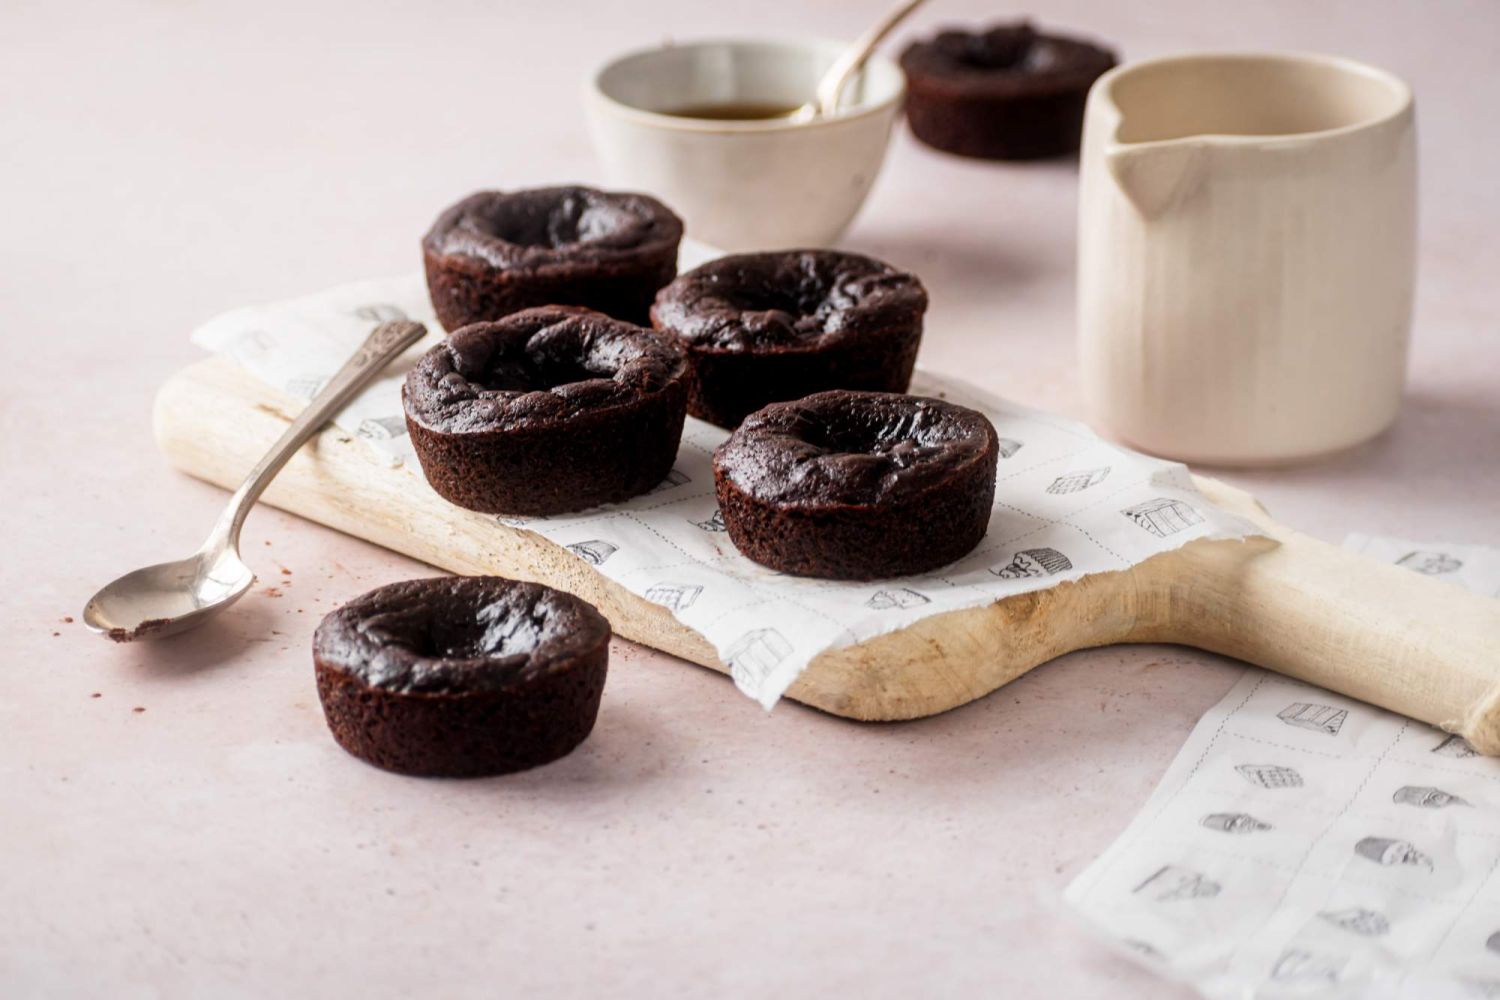 Fudgy flourless pumpkin brownies baked into muffins with coffee and maple syrup on the side.